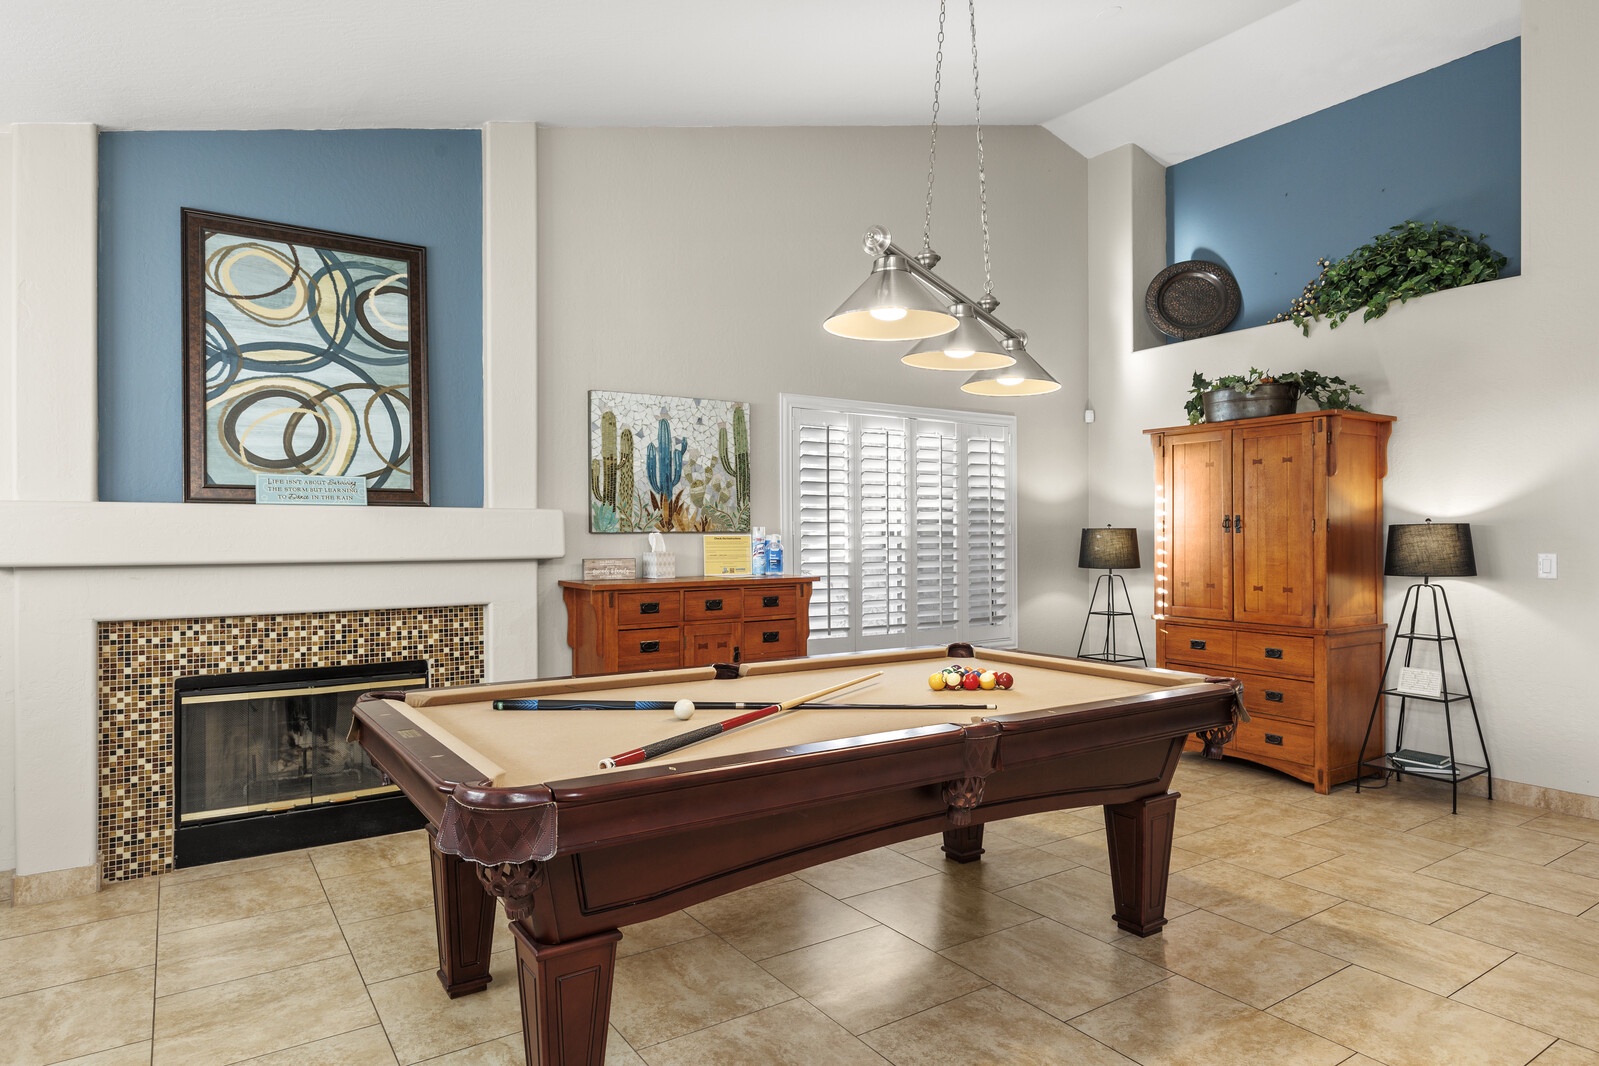 Game Room and Lounge includes a pool table, and high top tables.